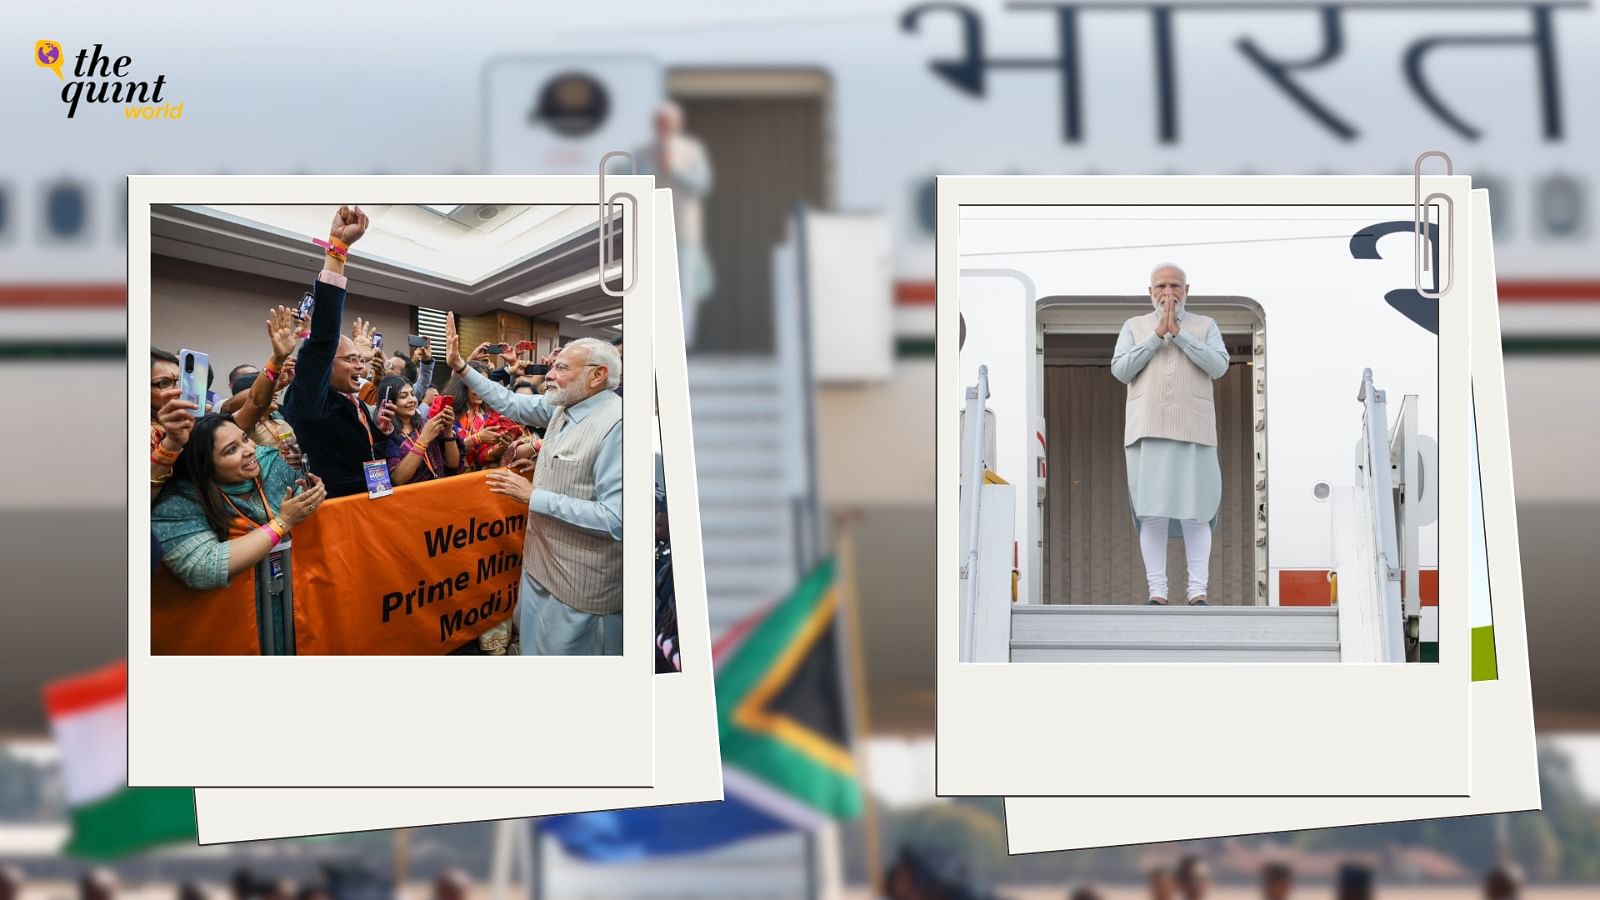 <div class="paragraphs"><p>Prime Minister Narendra Modi landed in Johannesburg, South Africa, on Tuesday, 22 August, to attend the 15th BRICS Summit, which will see extensive participation from global leaders and the in-person nature of the summit.</p></div>